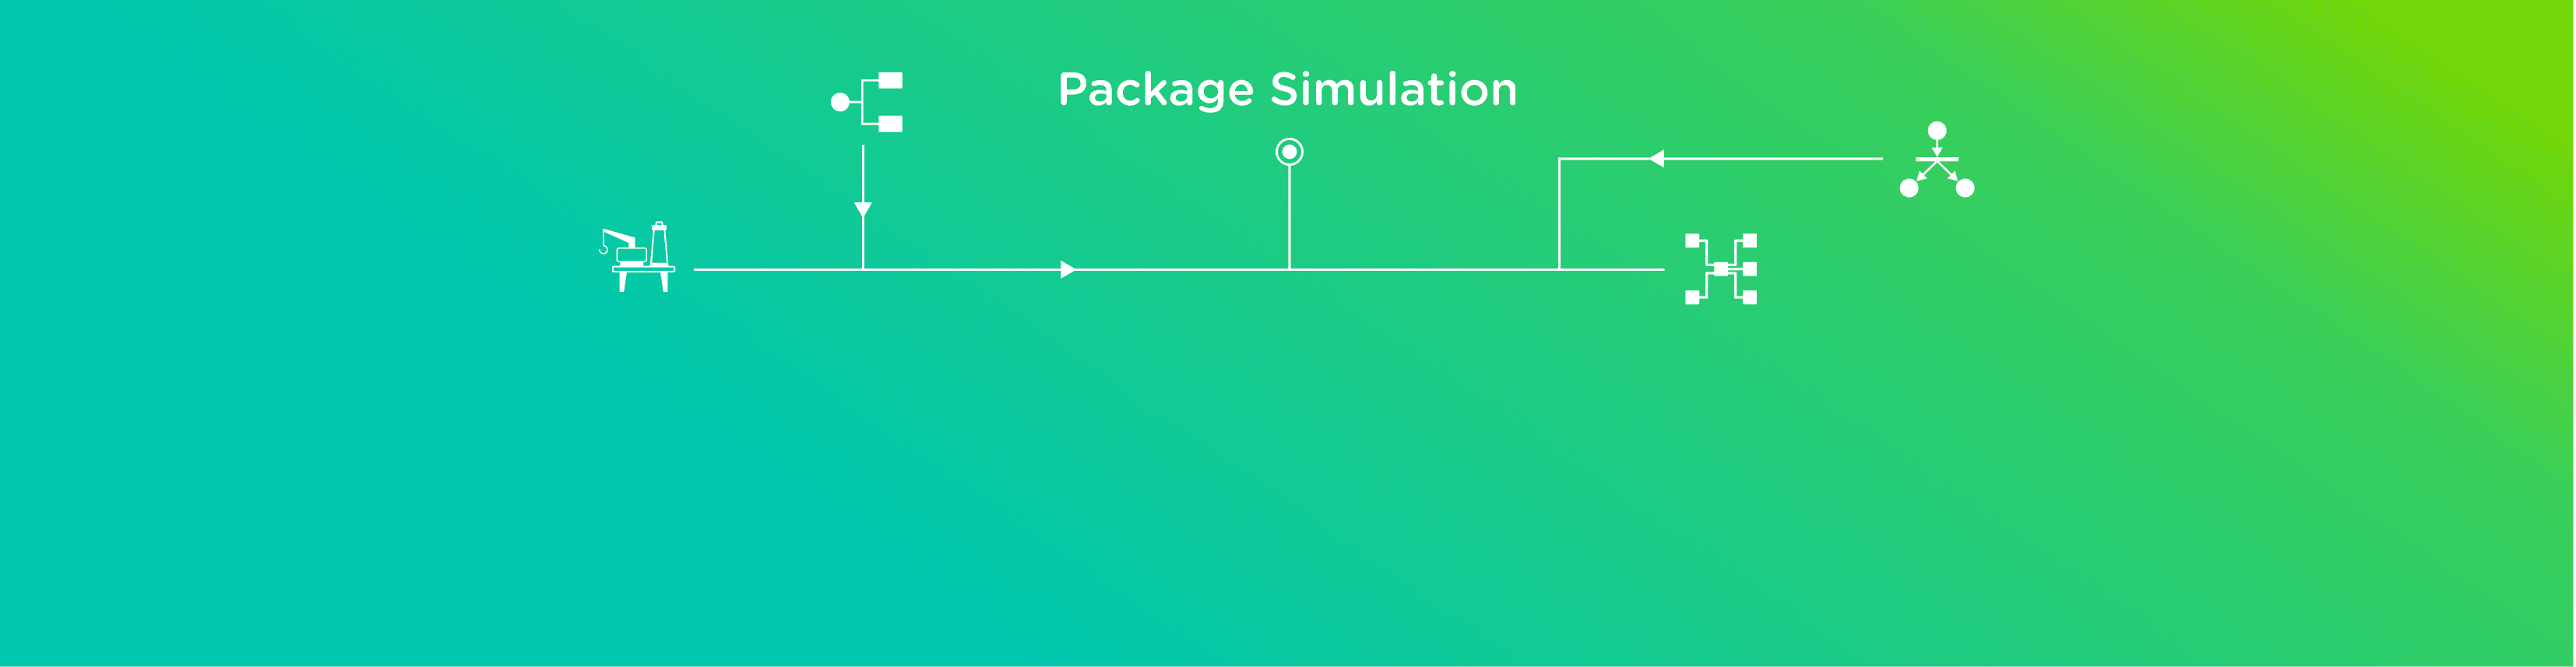 Package Simulation 